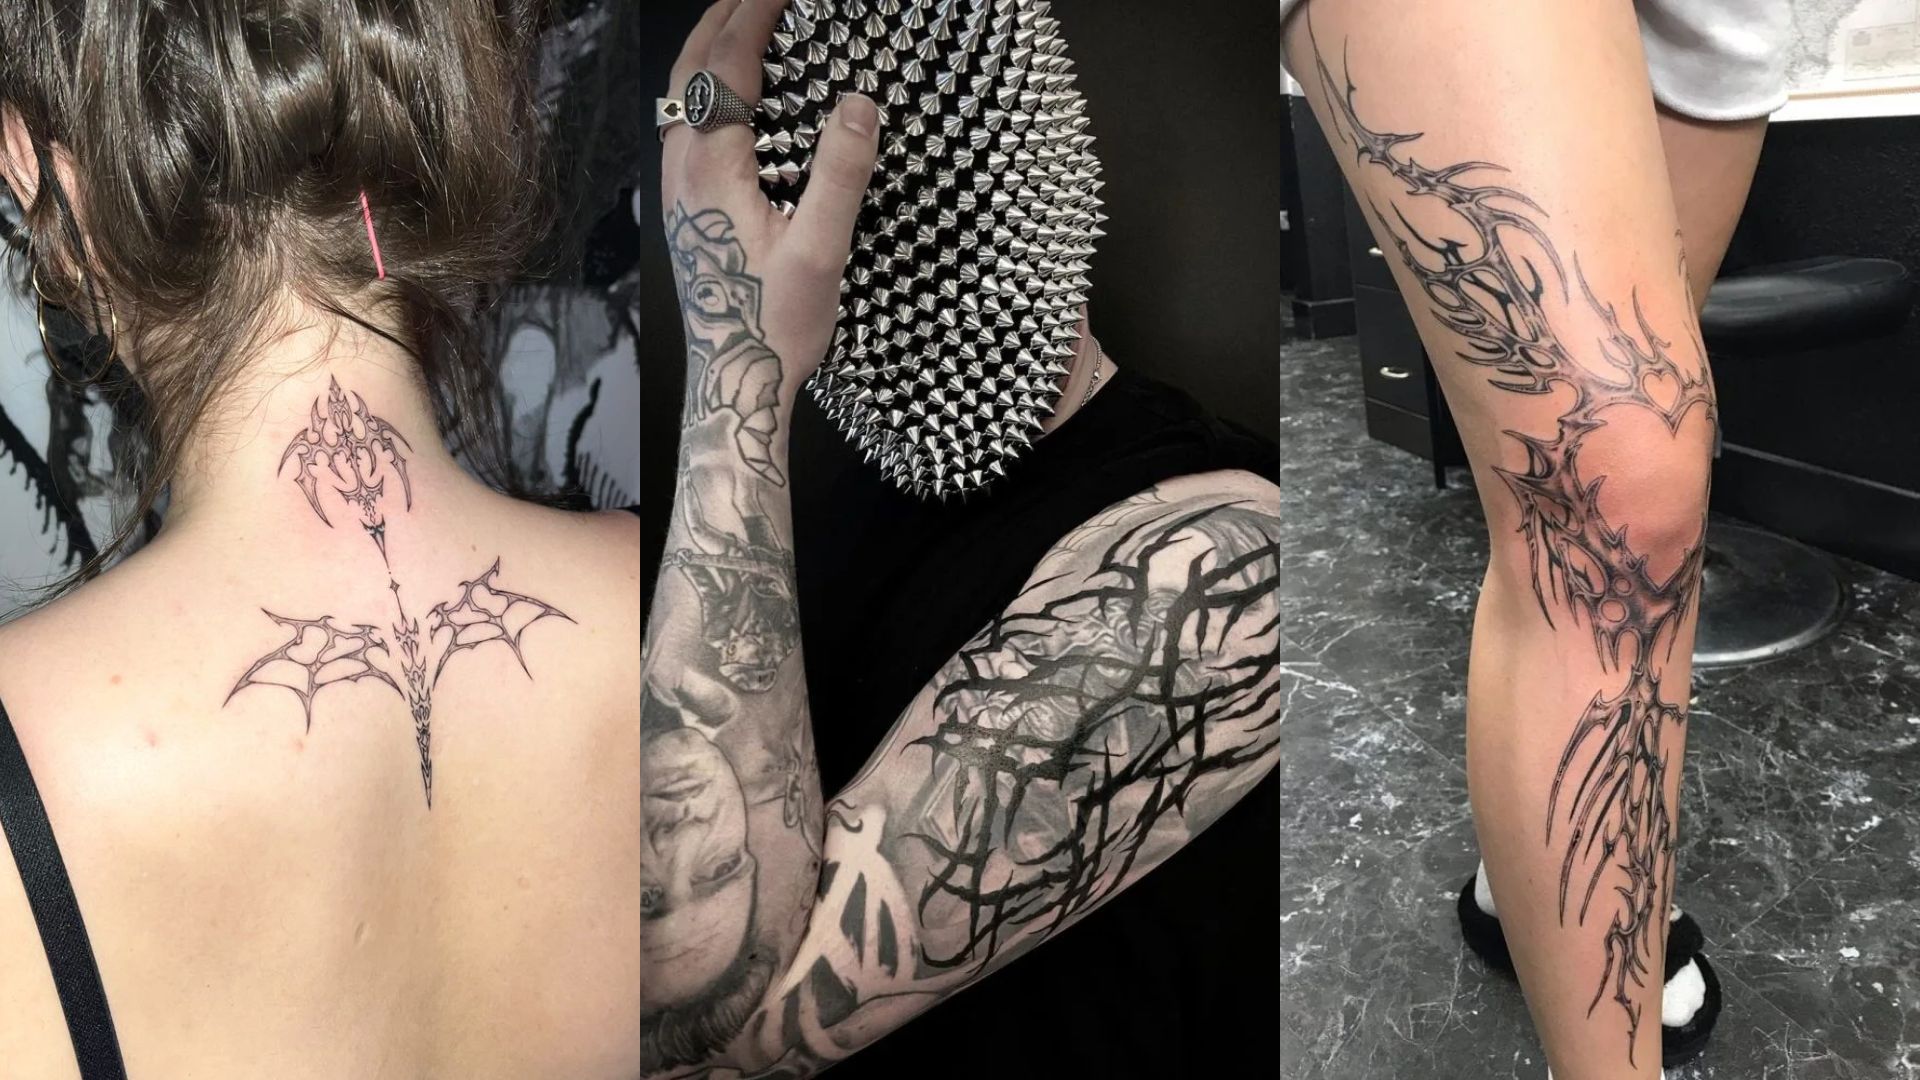 Celebrity Tattoo Artists Share the Trending Tattoo Designs For 2021 -  Features -